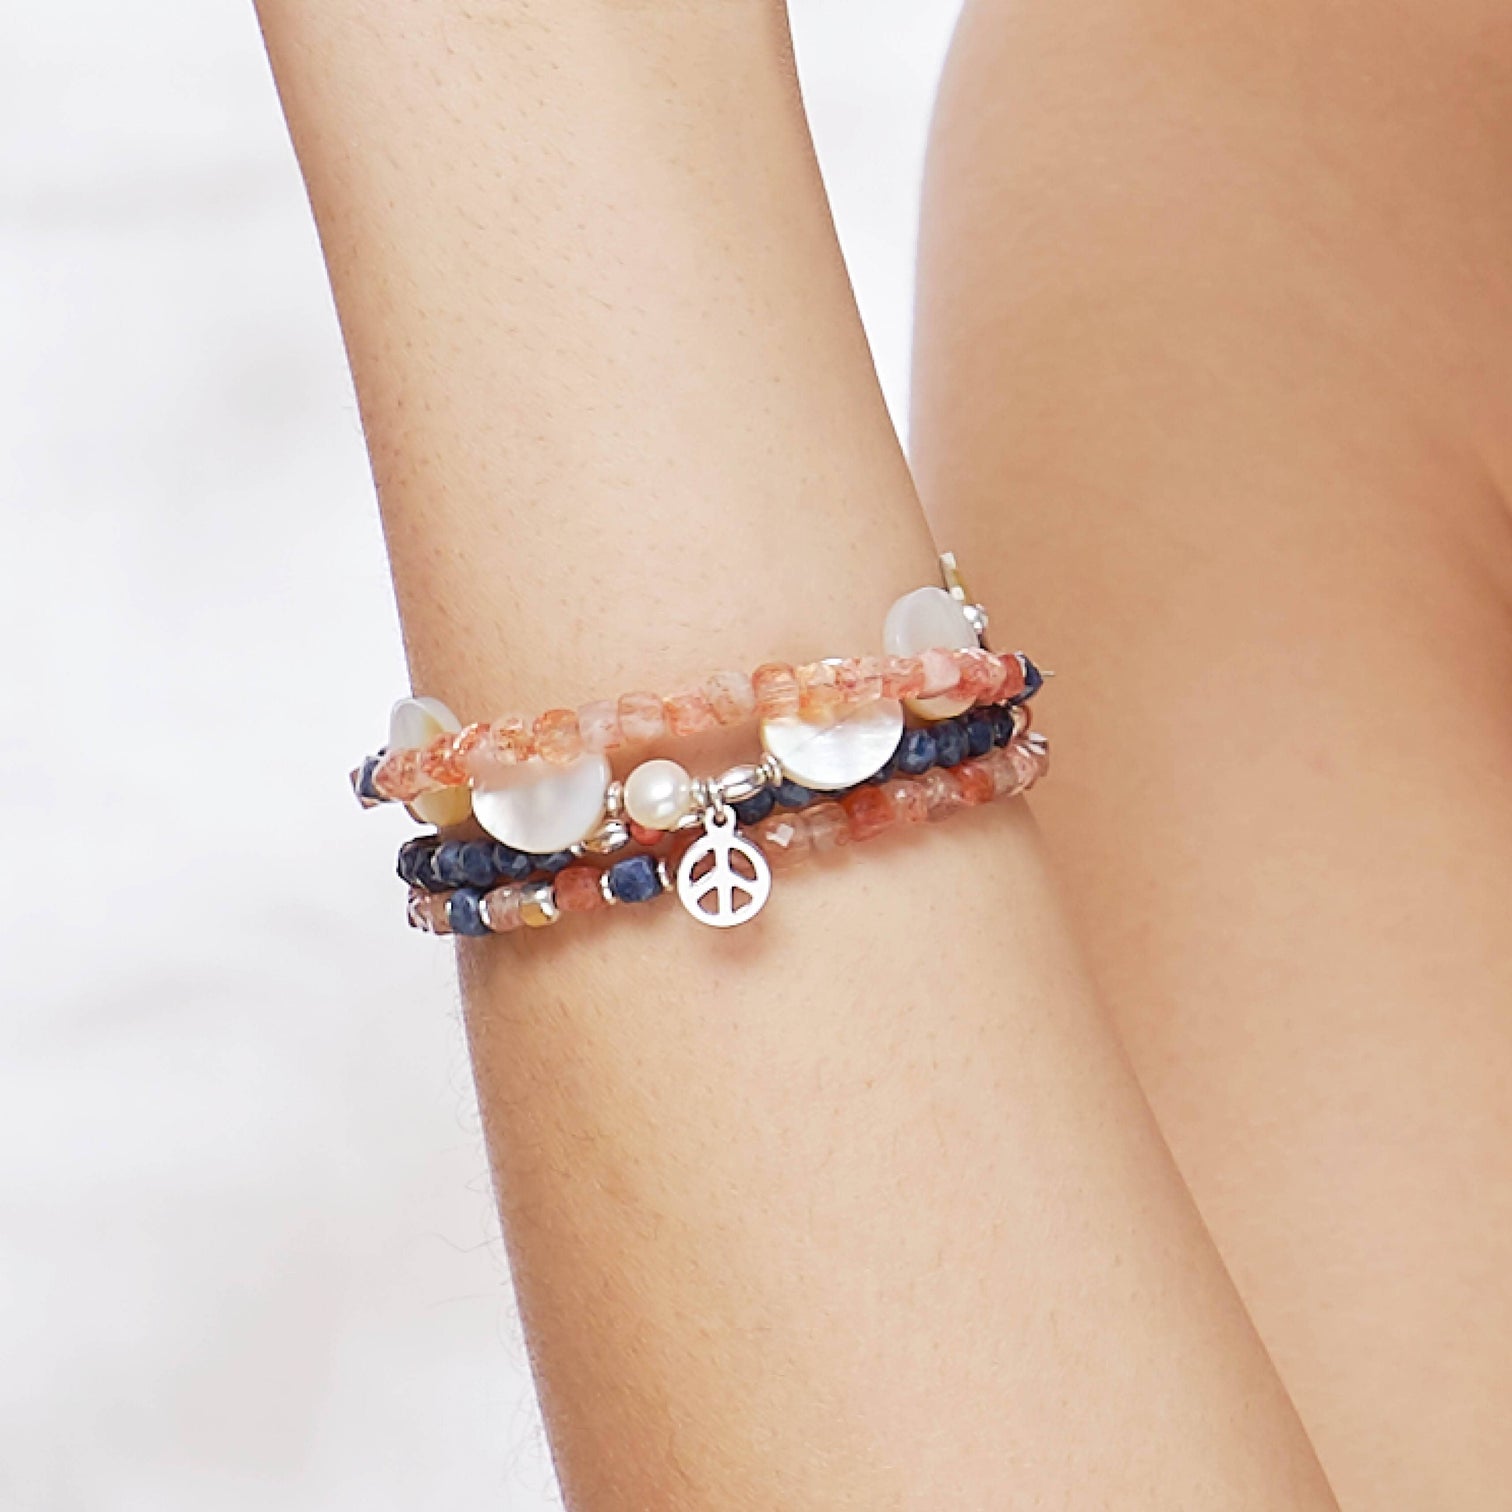 Close-Up of the female Model wearing the Sky Bracelet made with faceted square Sapphires, the Ginger Bracelet made with faceted square Sunstones and the Marilla Bracelet made with Mother of Pearls and a Sterling Silver Peace charm. 